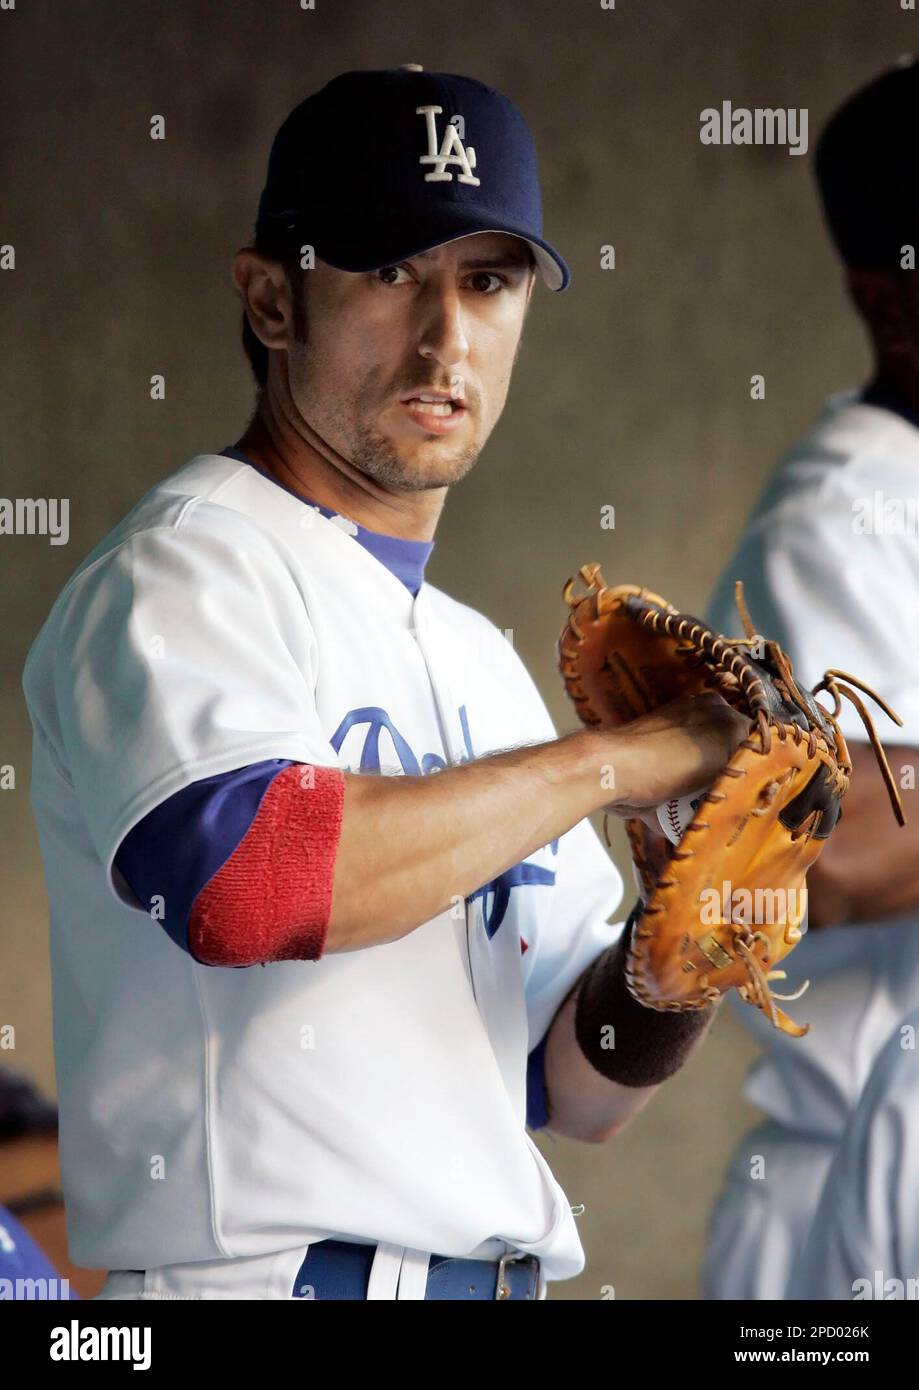 National League All Star Nomar Garciaparra of the Los Angeles Dodgers warms  up during batting practice for the 77th All-Star Game at PNC Park in  Pittsburgh, Penn. on July 10, 2006. (UPI